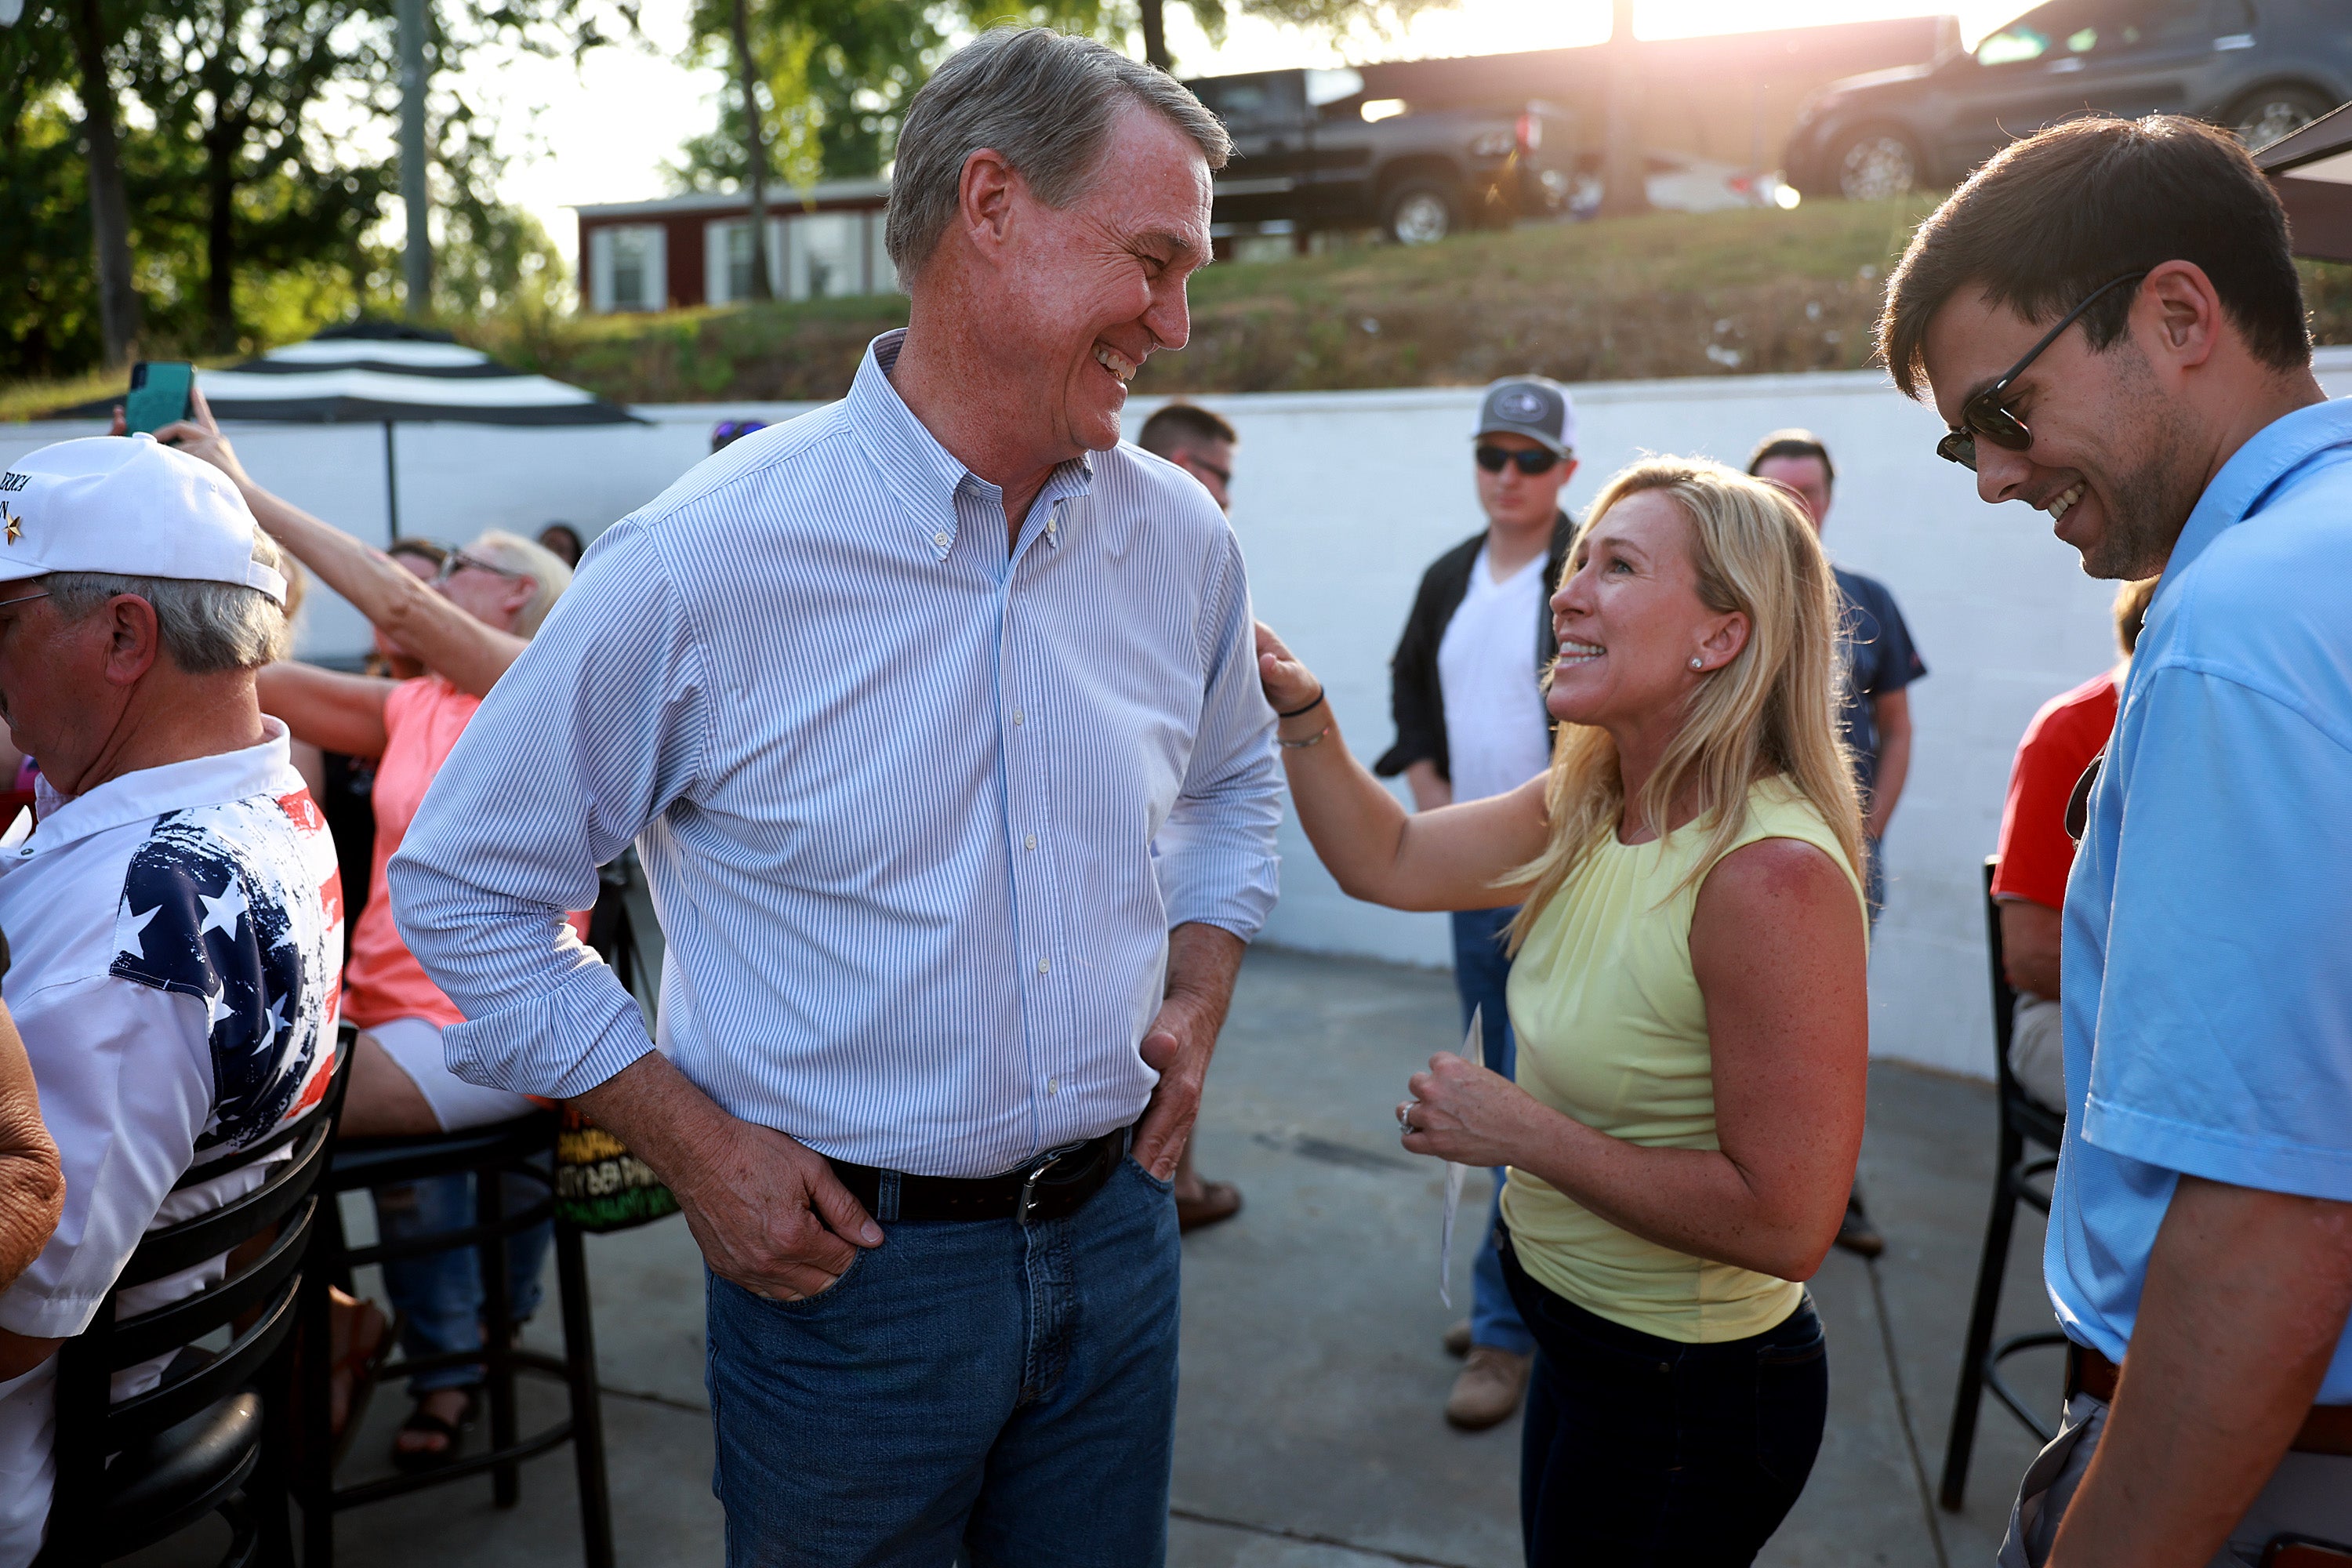 Republican gubernatorial candidate David Perdue and Rep Marjorie Taylor Greene speak to each other during a Bikers for Trump campaign event held at the Crazy Acres Bar & Grill on May 20, 2022 in Plainville, Georgia. Former U.S. Sen. David Perdue (R-GA) is running to unseat Georgia Gov. Brian Kemp and Rep. Greene is running for a second congressional term in the state's primary. (Photo by Joe Raedle/Getty Images)